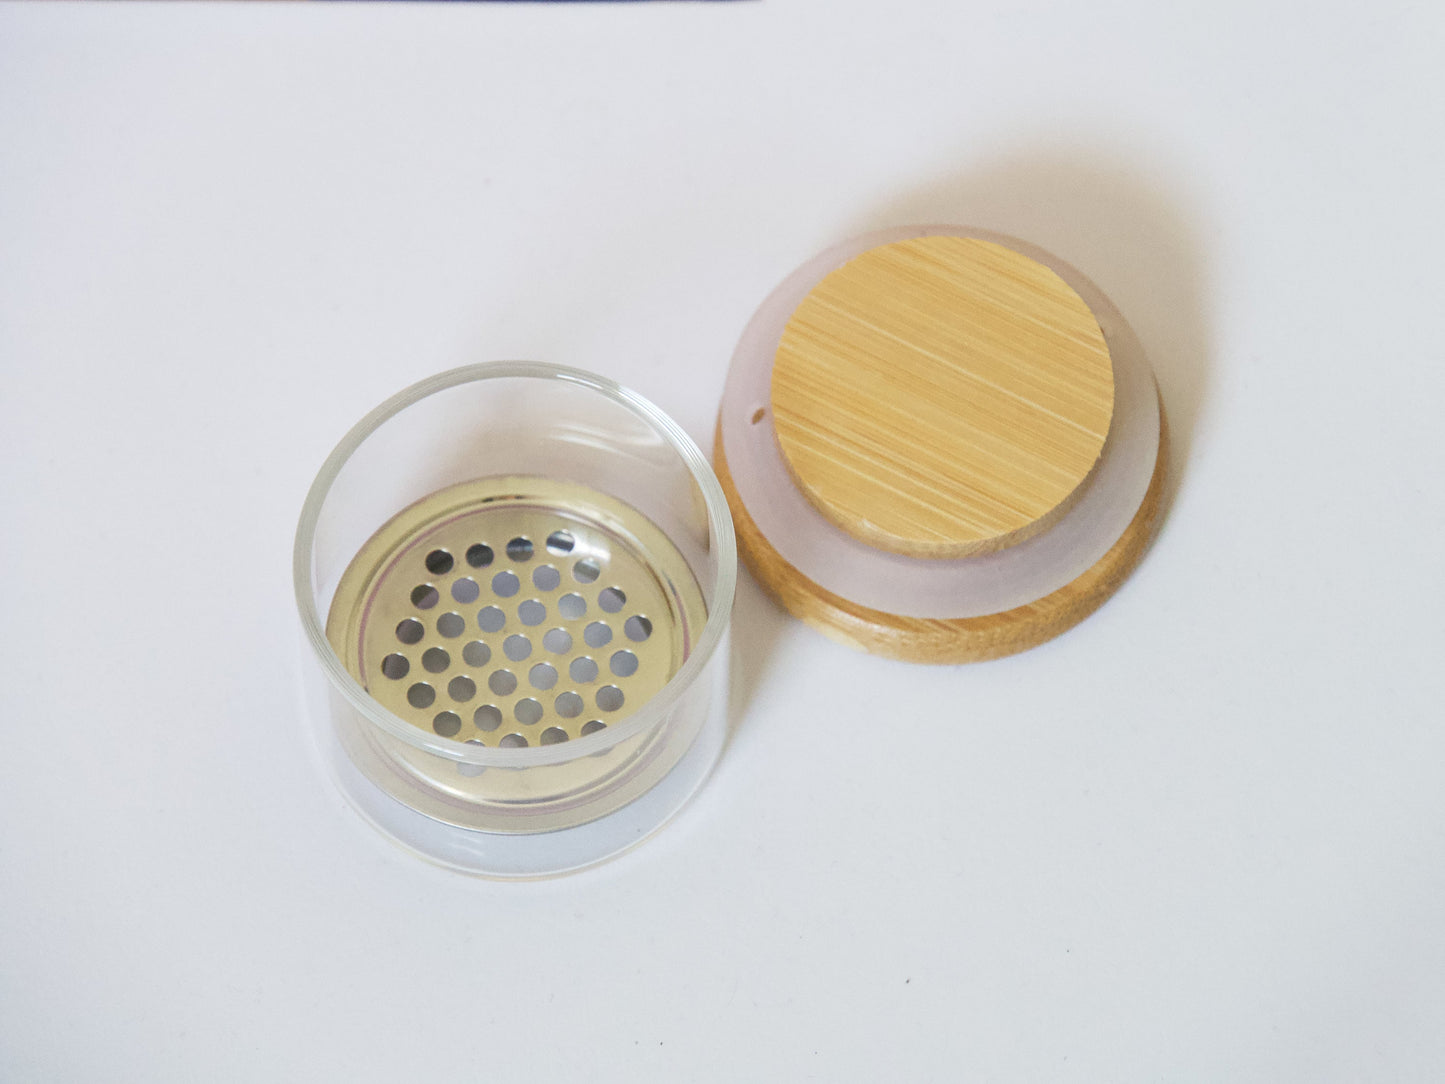 Steel Strainer Brush Cleansing Glass Cup / Nail Brushes Washing Bowl Wood Lid/ Wash off Glitters, Powders, or Gel Remnants Manicure Tool